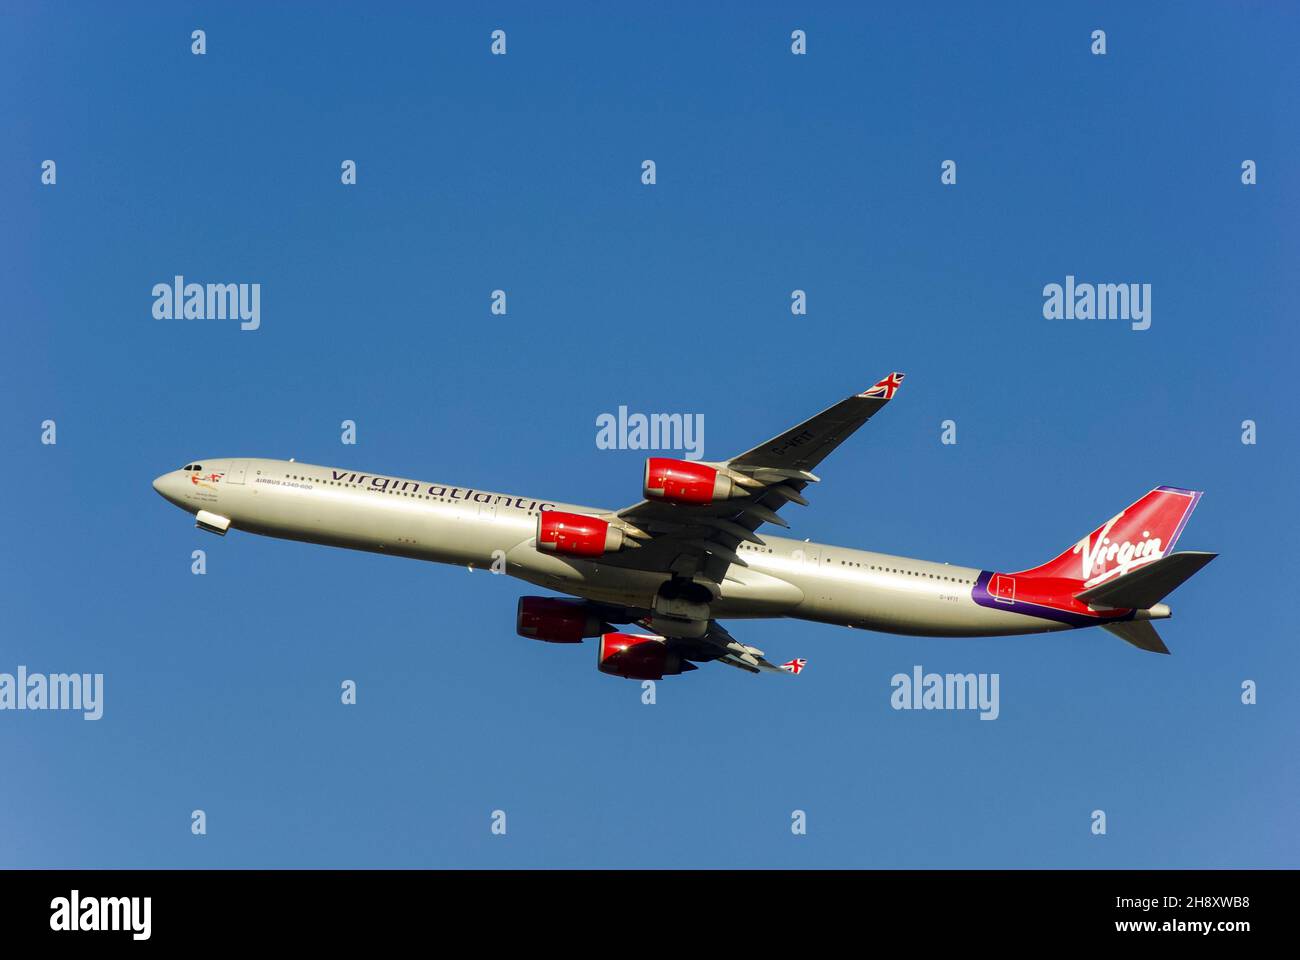 Virgin Atlantic Airbus A340 airliner jet plane G-VFIT climbing after taking off from London Heathrow Airport, UK, into blue sky for long haul flight Stock Photo